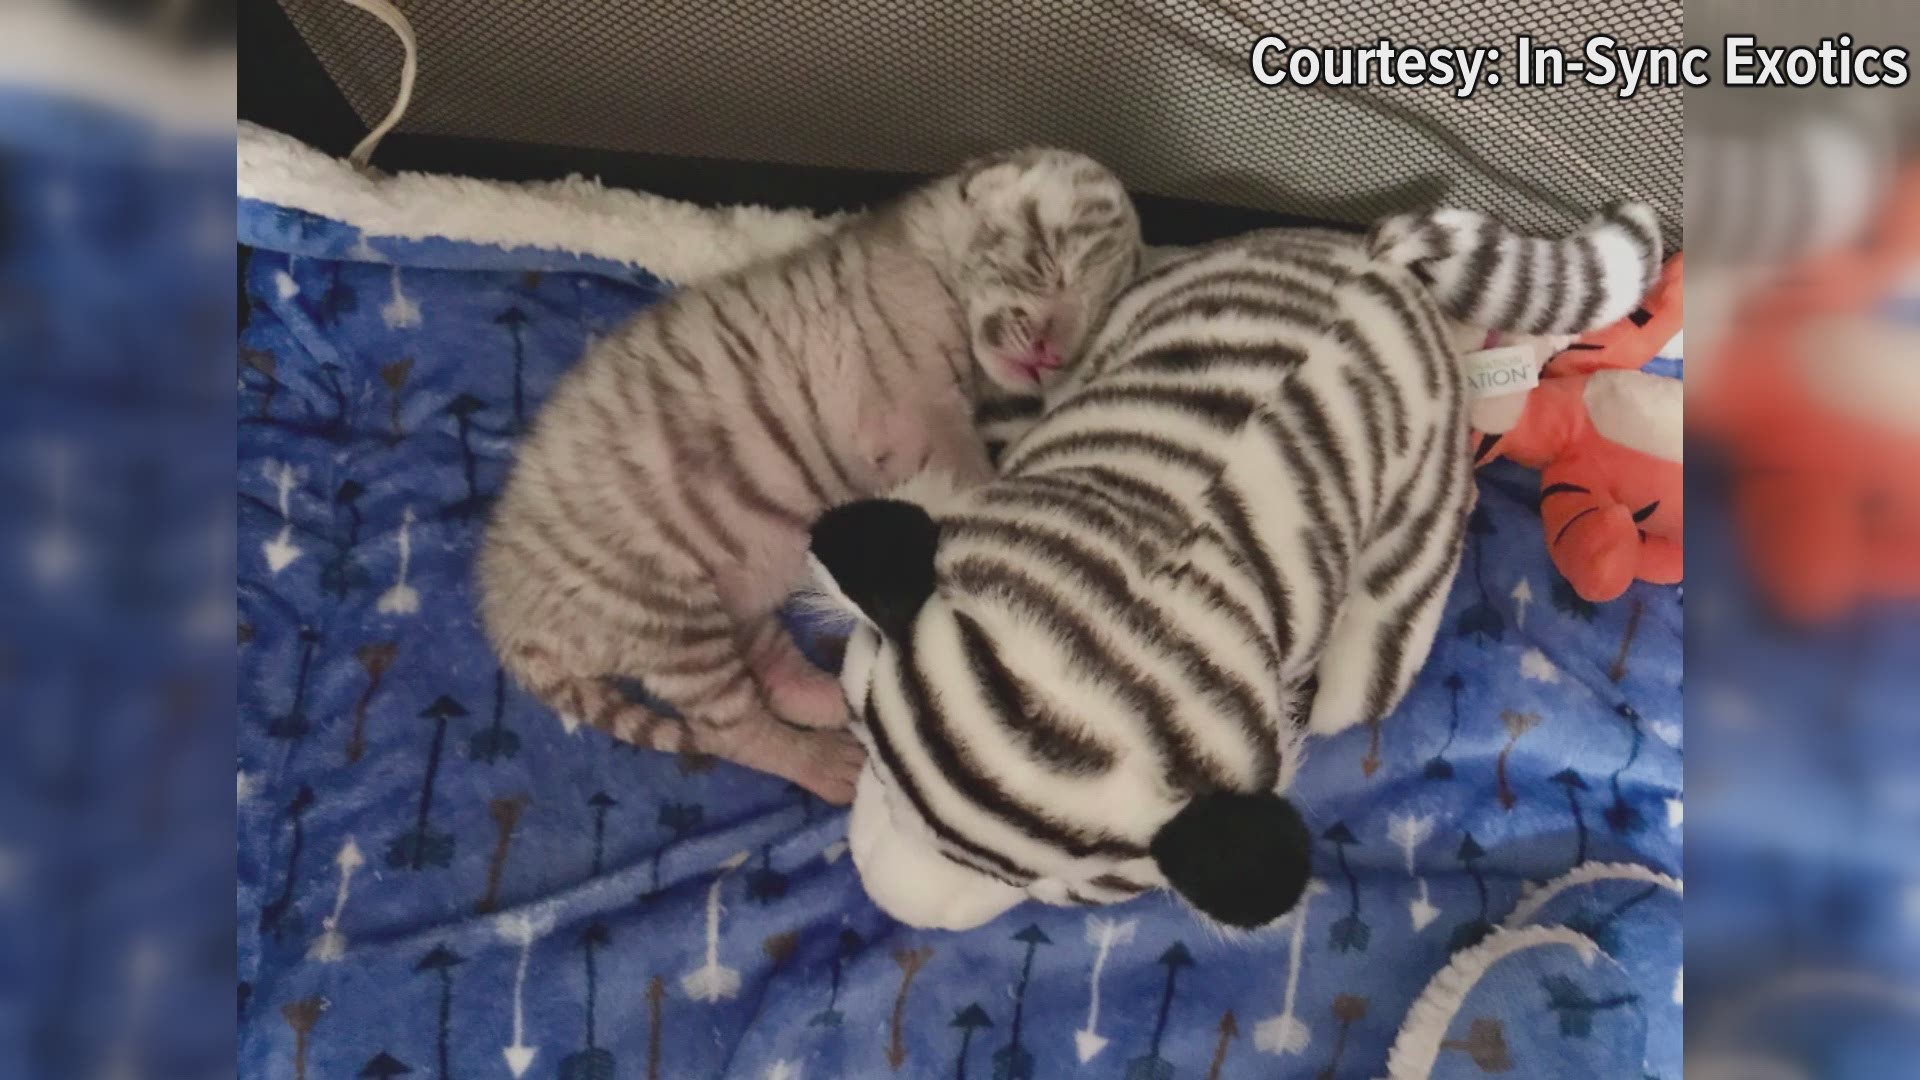 This little tiger cub was named Kylo Ren.